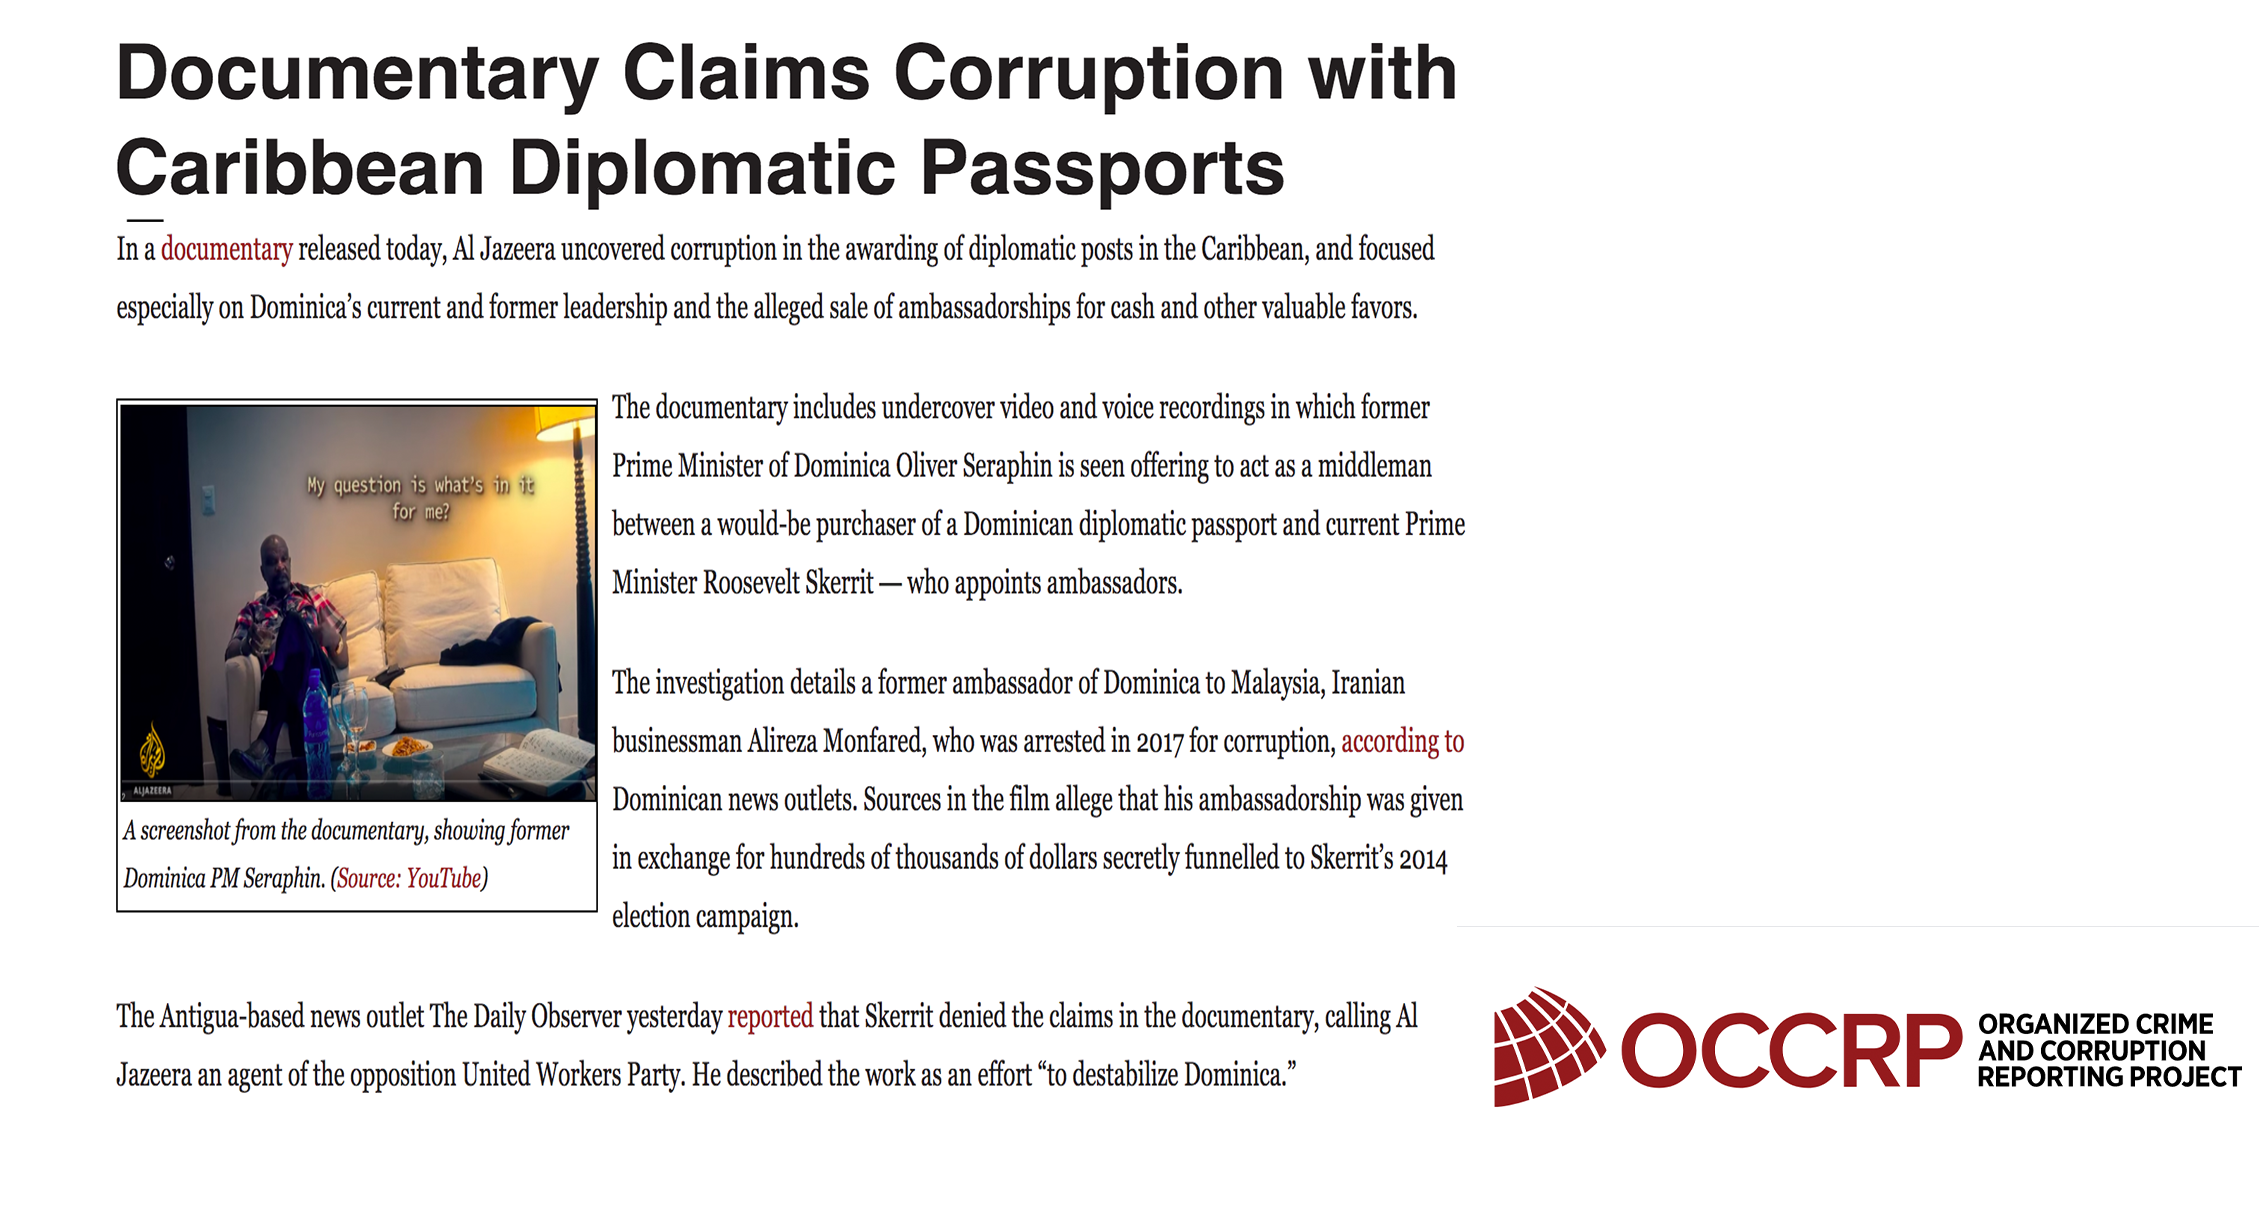 OCCRP: Documentary Claims Corruption with Caribbean Diplomatic Passports